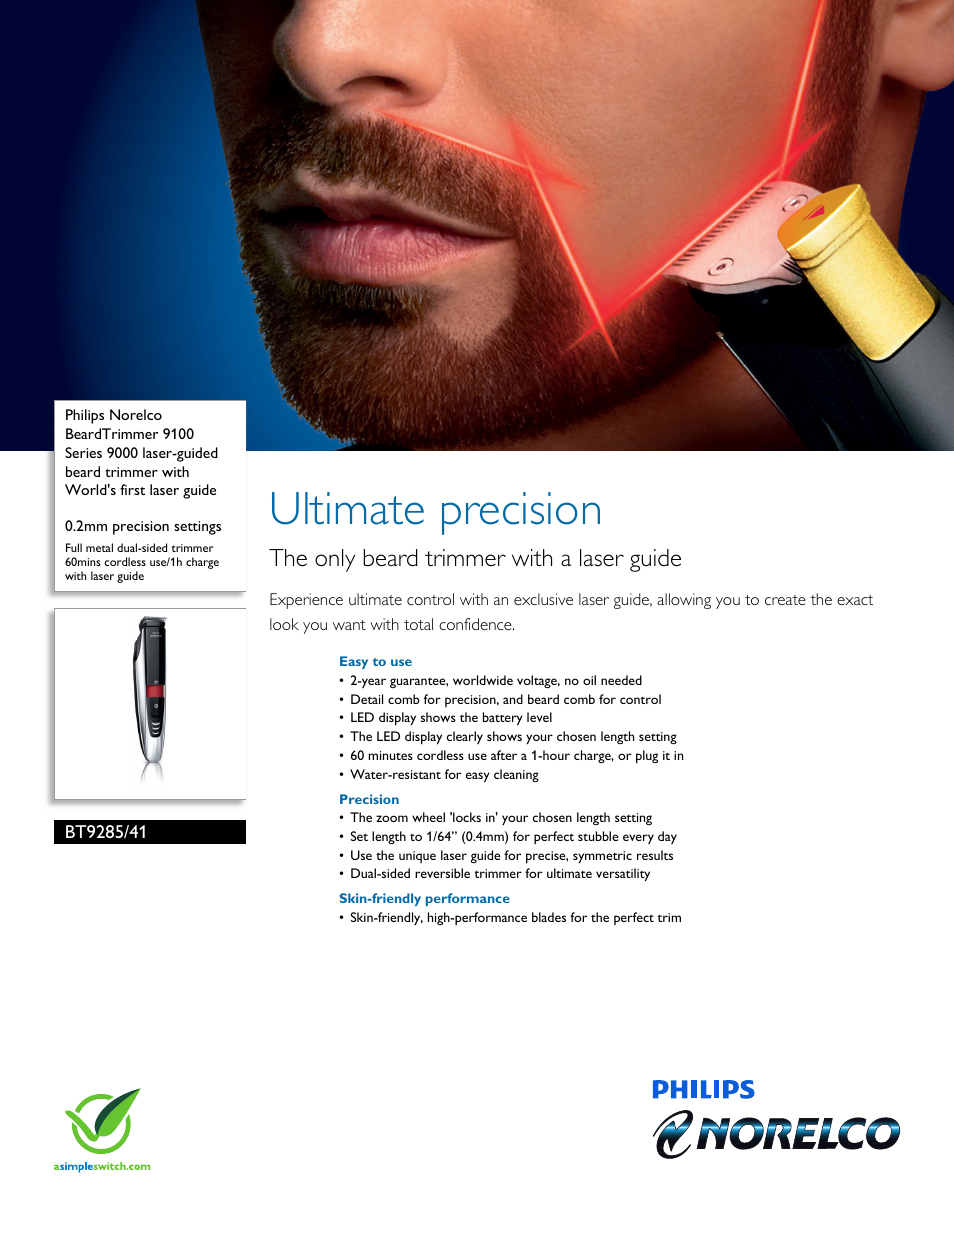 Philips Norelco BeardTrimmer 9100 Series 9000 laser-guided beard trimmer  BT9285-41 0.2mm precision settings Full metal dual-sided trimmer 60mins  cordless use-1h charge with laser guide with World&#39;s first laser guide  User Manual